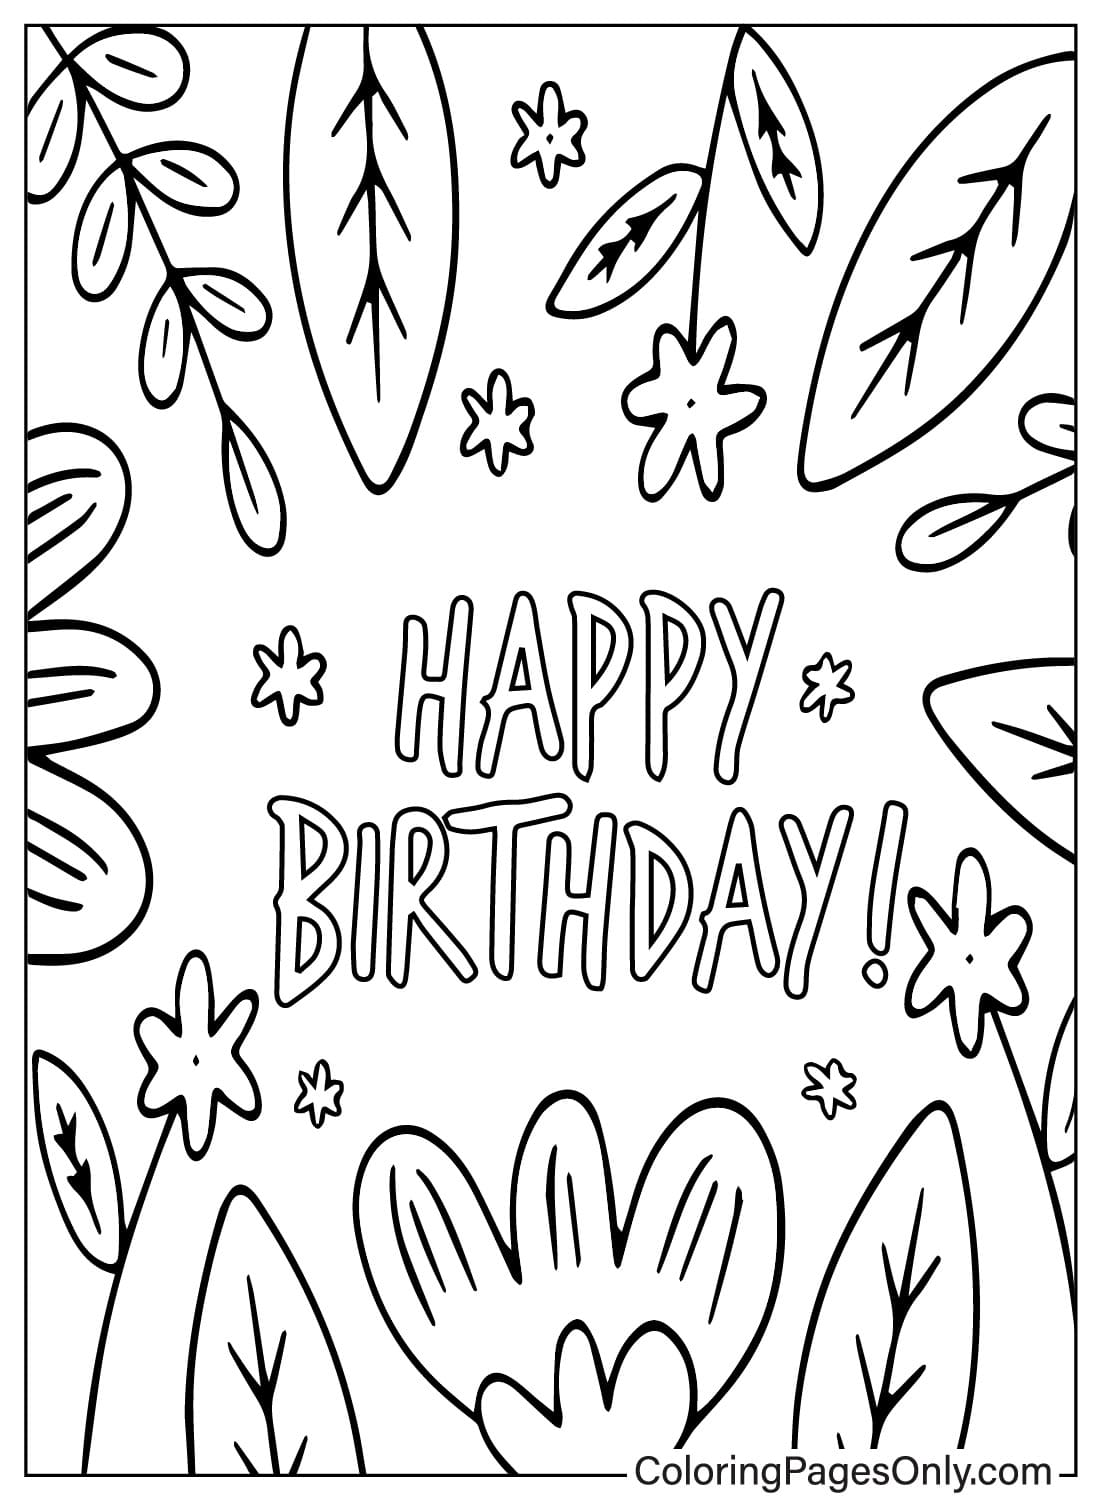 Happy Birthday Card Coloring Page - Free Printable Coloring Pages